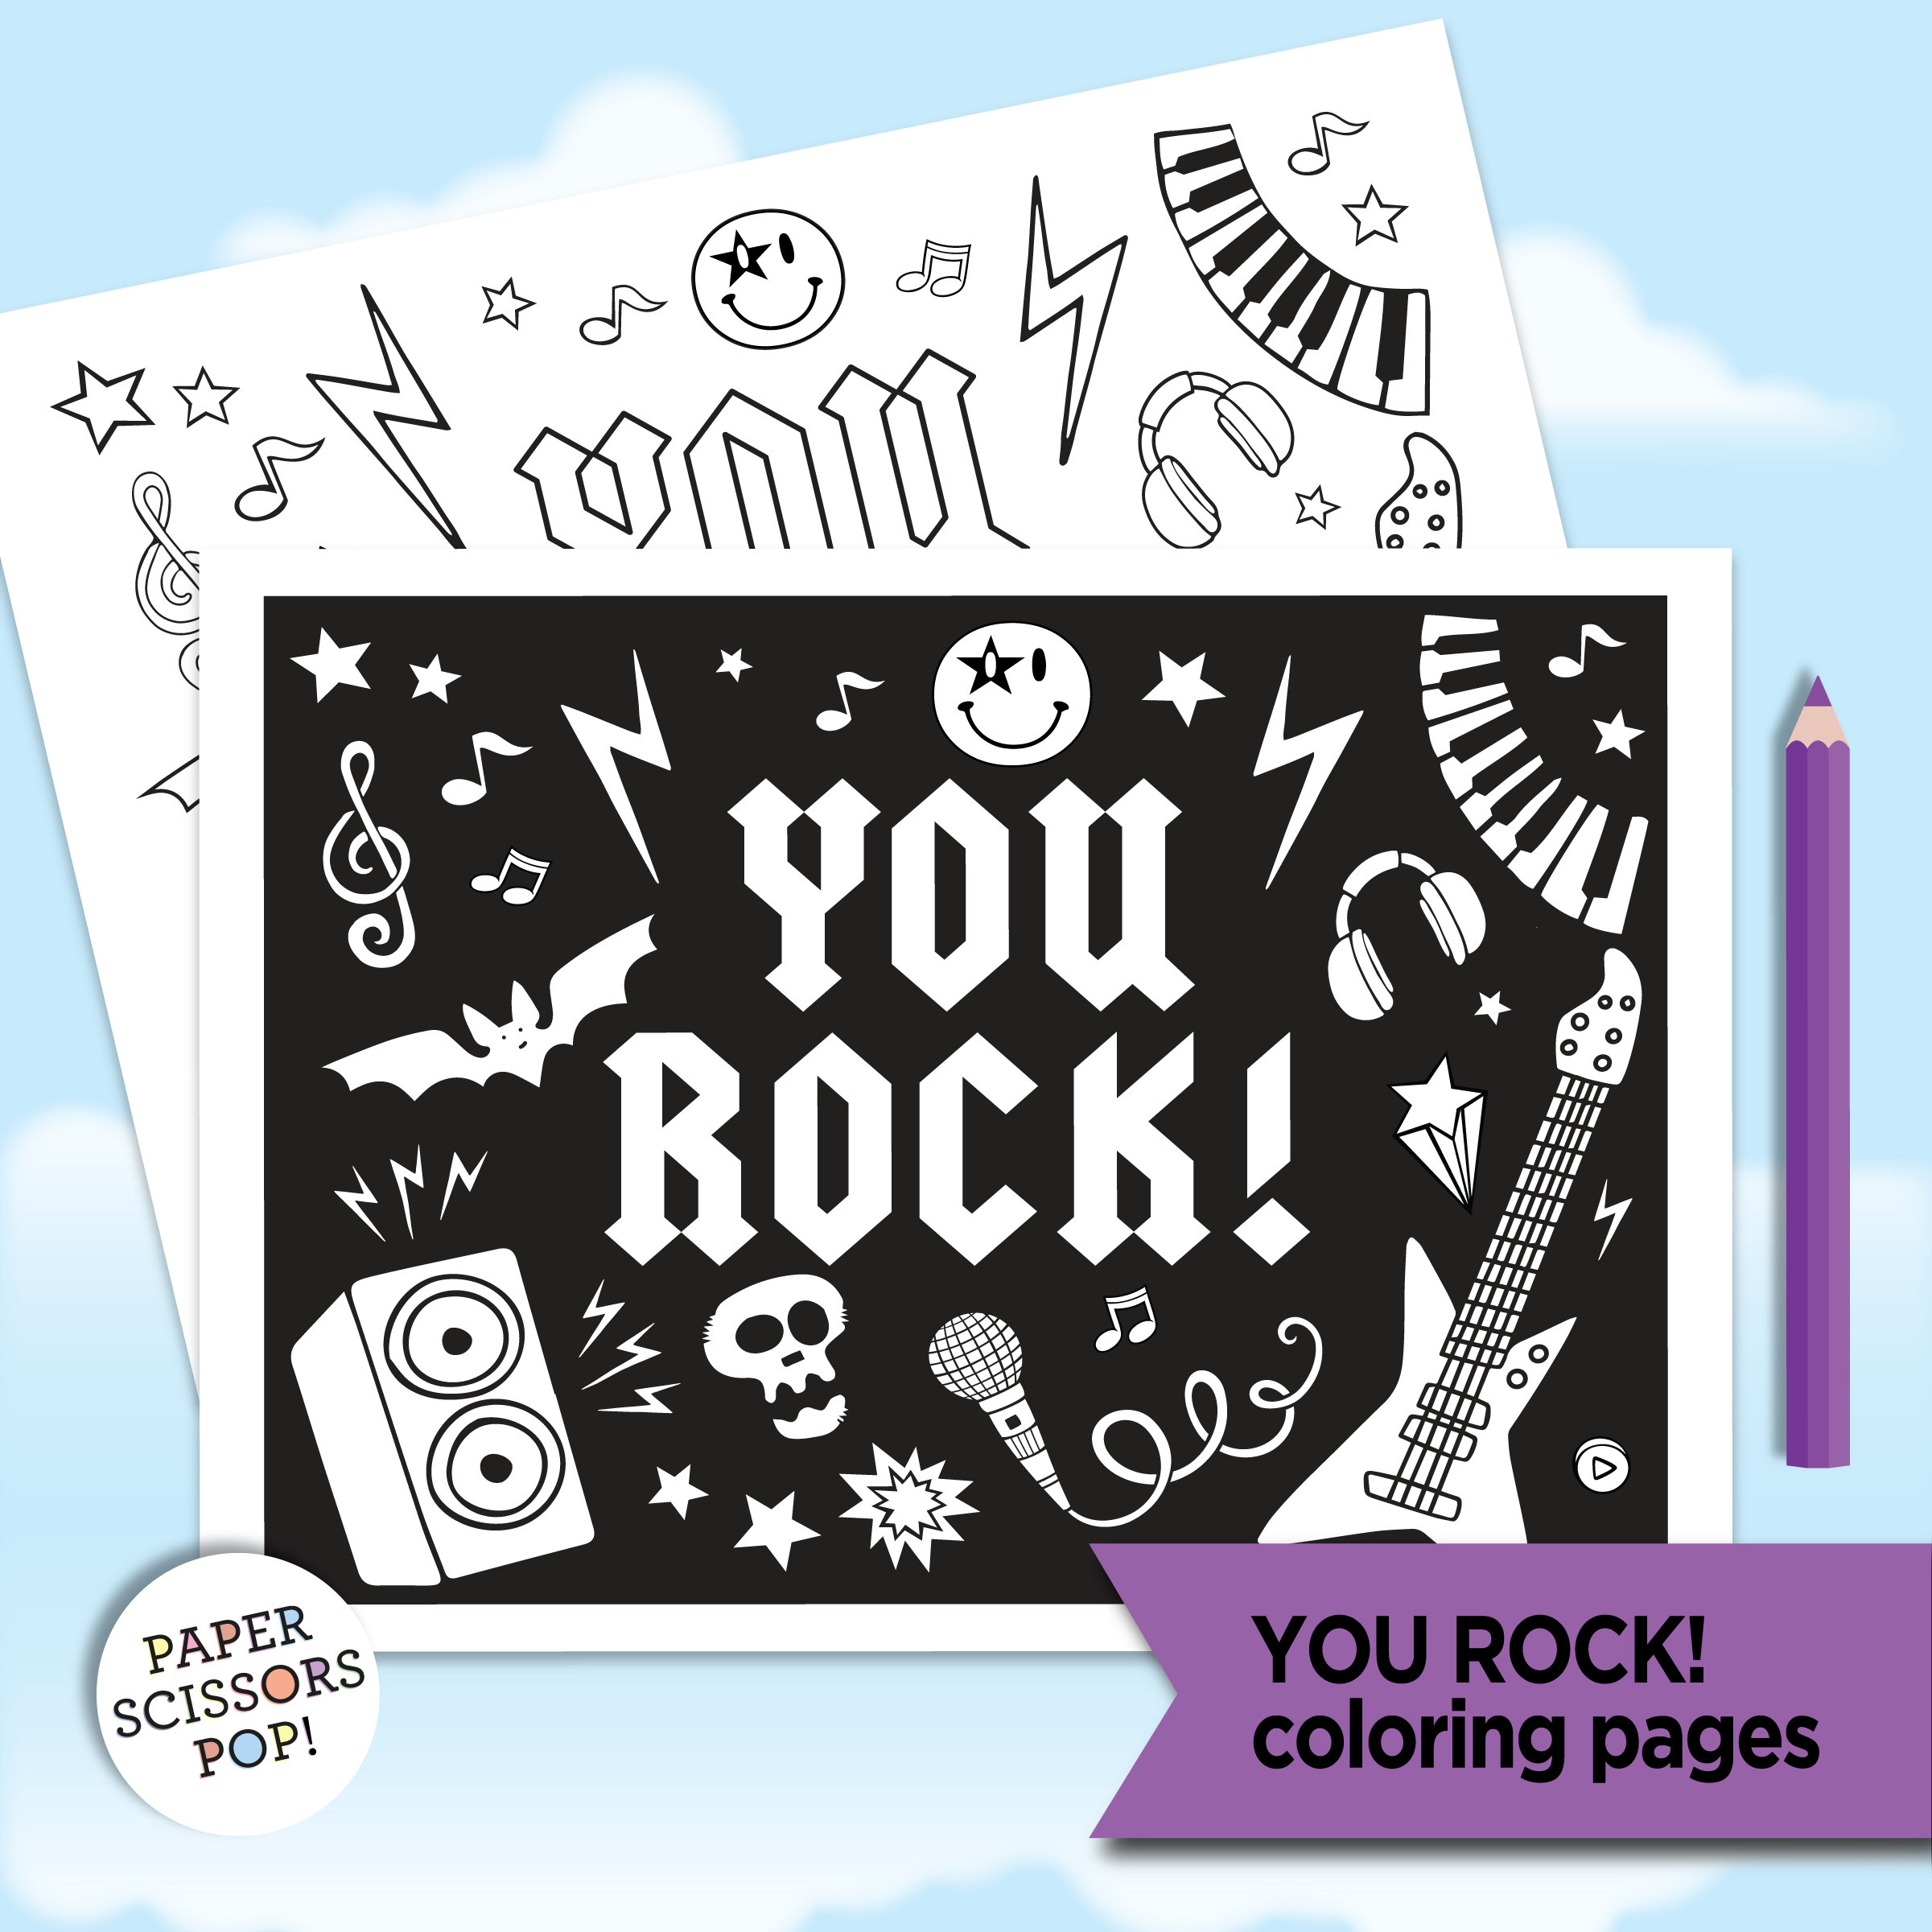 You rock music coloring pages for kids and adults music coloring pages for birthday music coloring sheets for dad school activity sheet